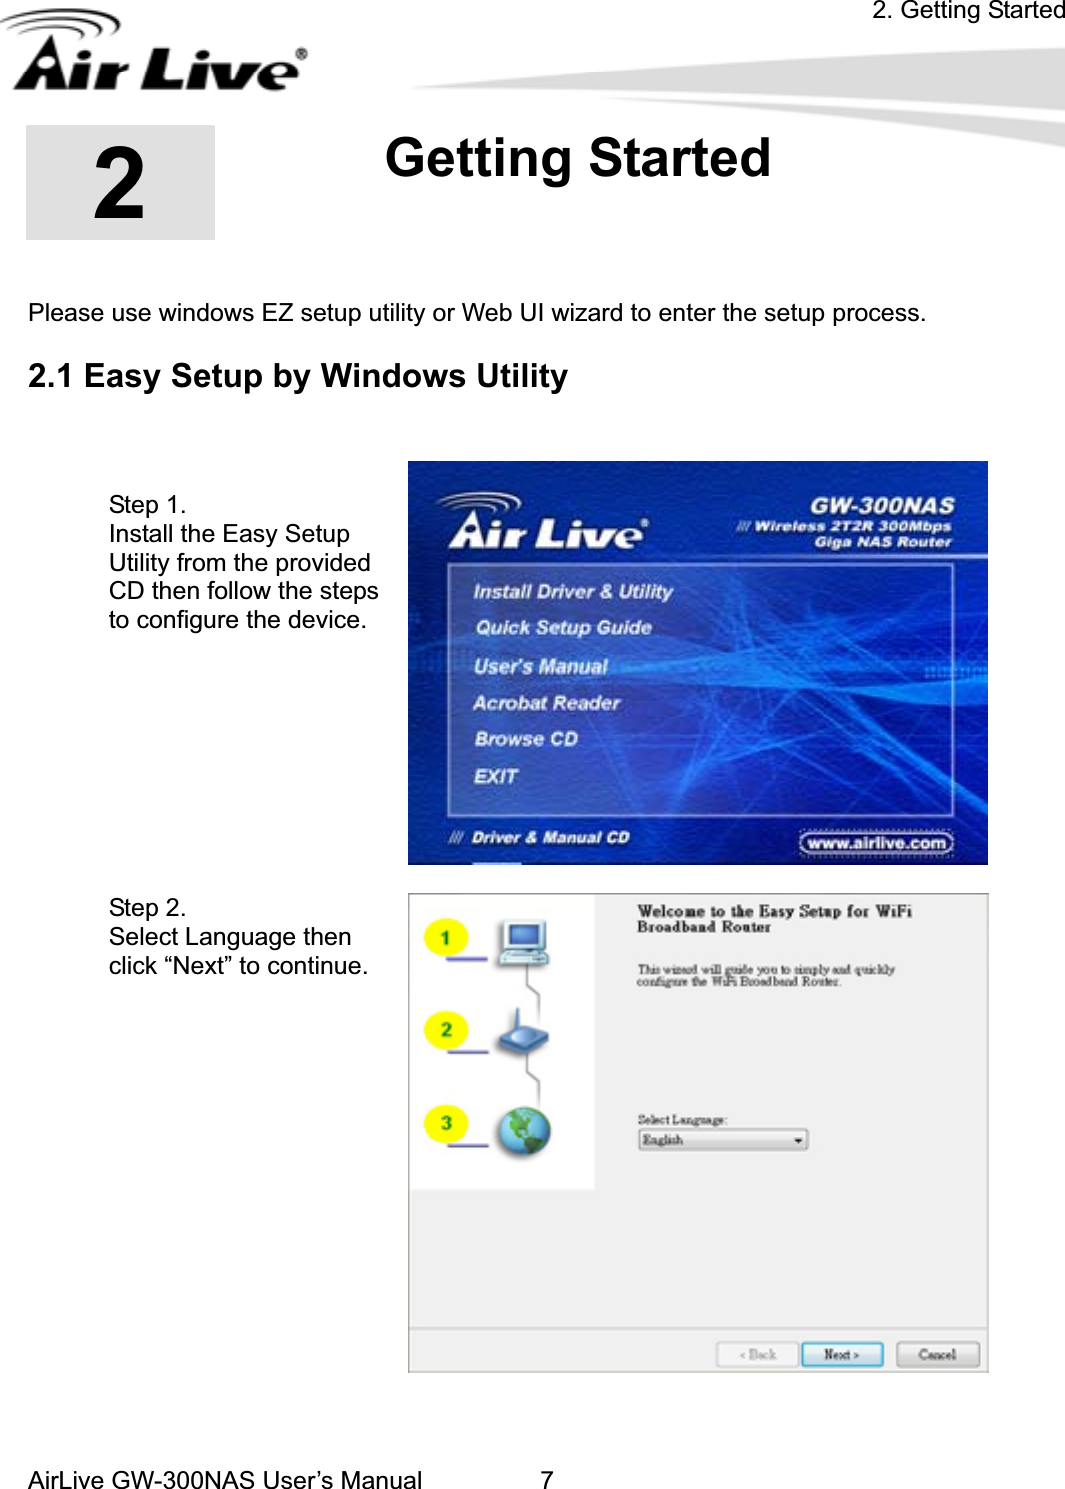 2. Getting StartedAirLive GW-300NAS User’s Manual 722.Getting Started Please use windows EZ setup utility or Web UI wizard to enter the setup process.     2.1 Easy Setup by Windows Utility   Step 1.   Install the Easy Setup Utility from the provided CD then follow the steps to configure the device. Step 2.   Select Language then click “Next” to continue. 